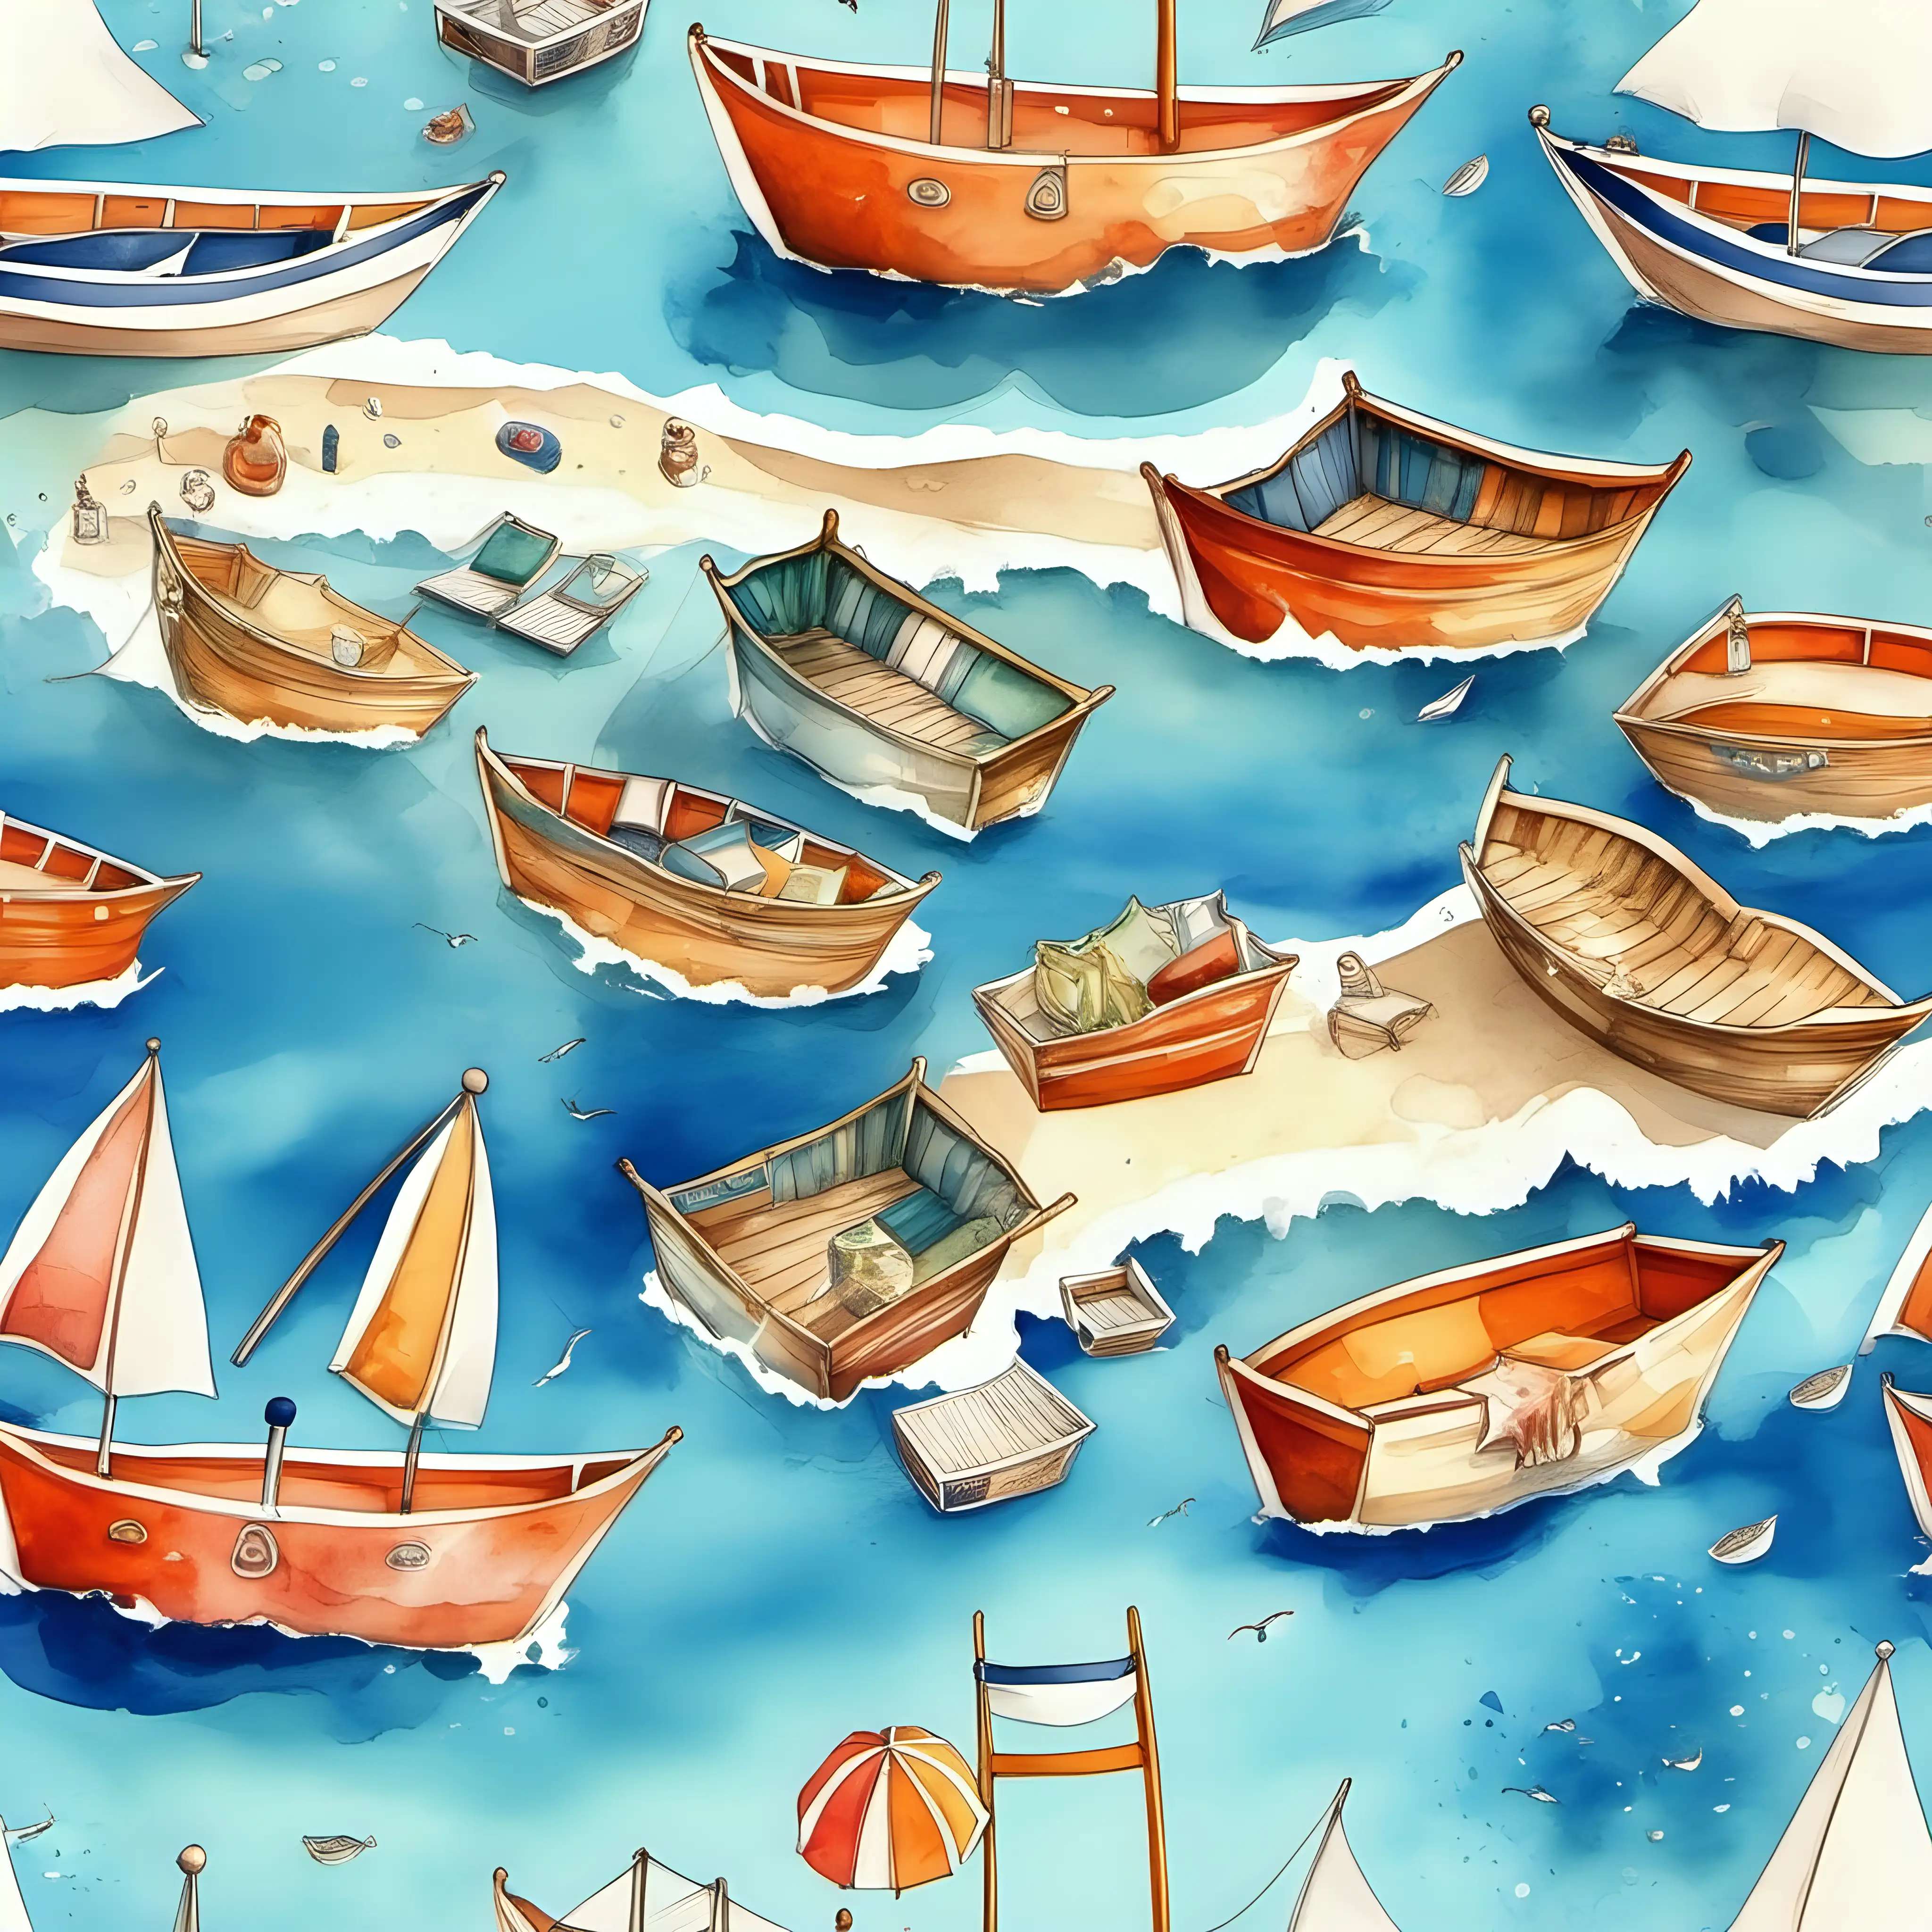 I want to create an illustrated pattern for a beauty box with sea and beach motif, boats, umbrellas and sunbeds, top view, I want an original illustration based on water colours or something similar